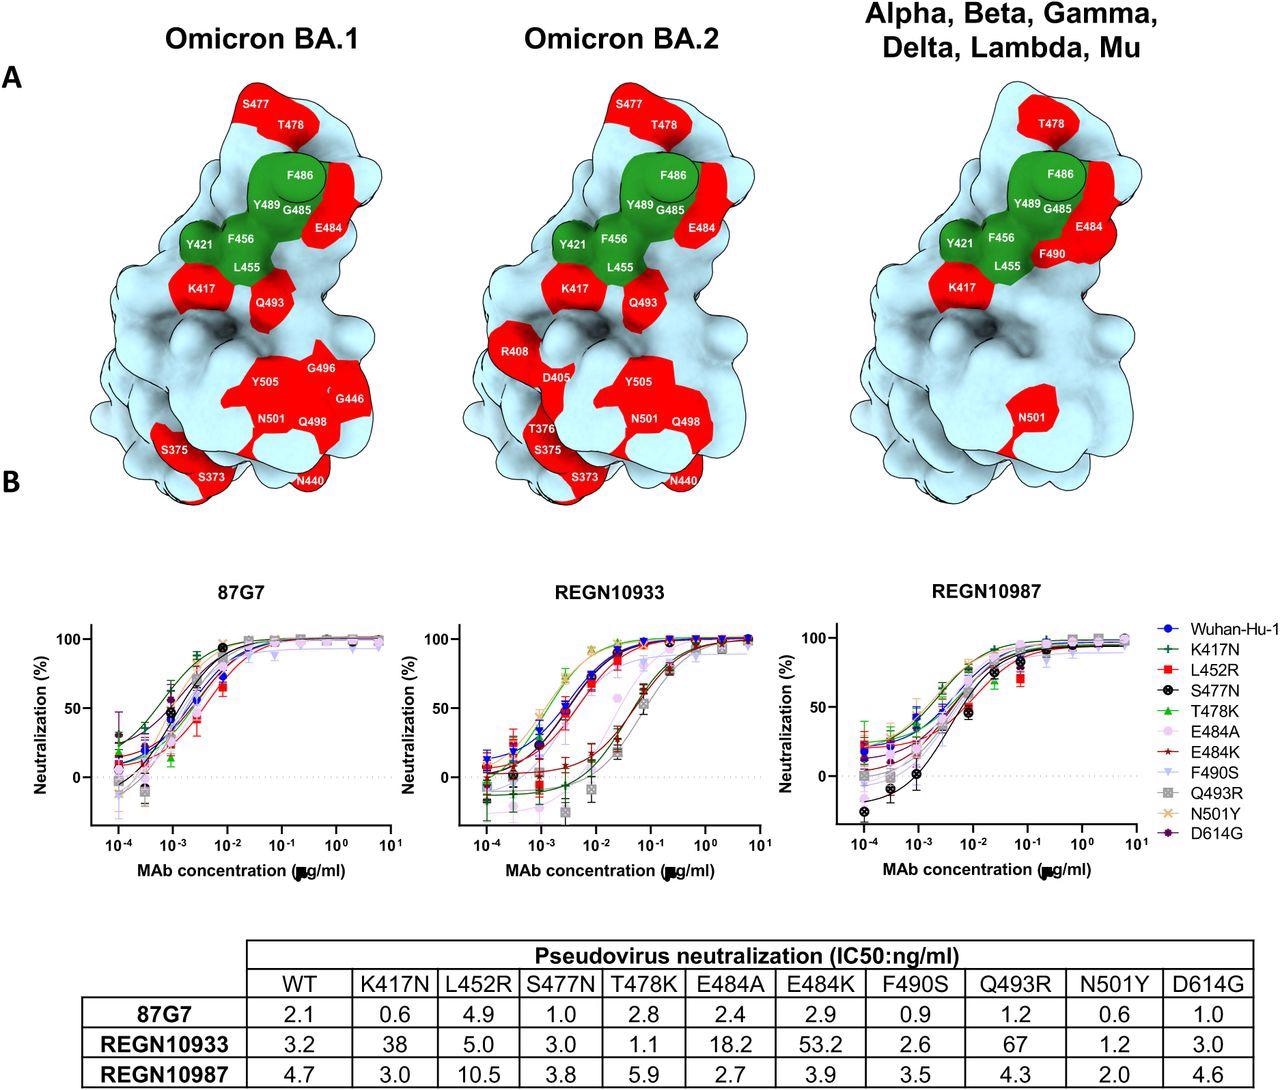 87G7 recognizes a conserved epitope in SARS-CoV-2 RBD (A) Surface representation of the SARS-CoV-2 S RBD with mutations colored red that are found in Omicron BA.1 (left panel) and Omicron BA.2 (middle panel). The right panel displays the set of mutations surrounding the 87G7 core epitope that are present in Alpha, Beta, Gamma, Delta, Lambda or Mu (see also Fig. 1a). The 87G7 core epitope residues are colored green. (B) 87G7 neutralizing activity against pseudoviruses with S variants carrying single residue substitutions found in the SARS-CoV-2 variants of concern. The REGN10933 and REGN10987 therapeutic mAbs were used for benchmarking. Data are shown as mean (± SEM) of two independent experiments with technical triplicates, and corresponding IC50 titers are presented in the lower panel.